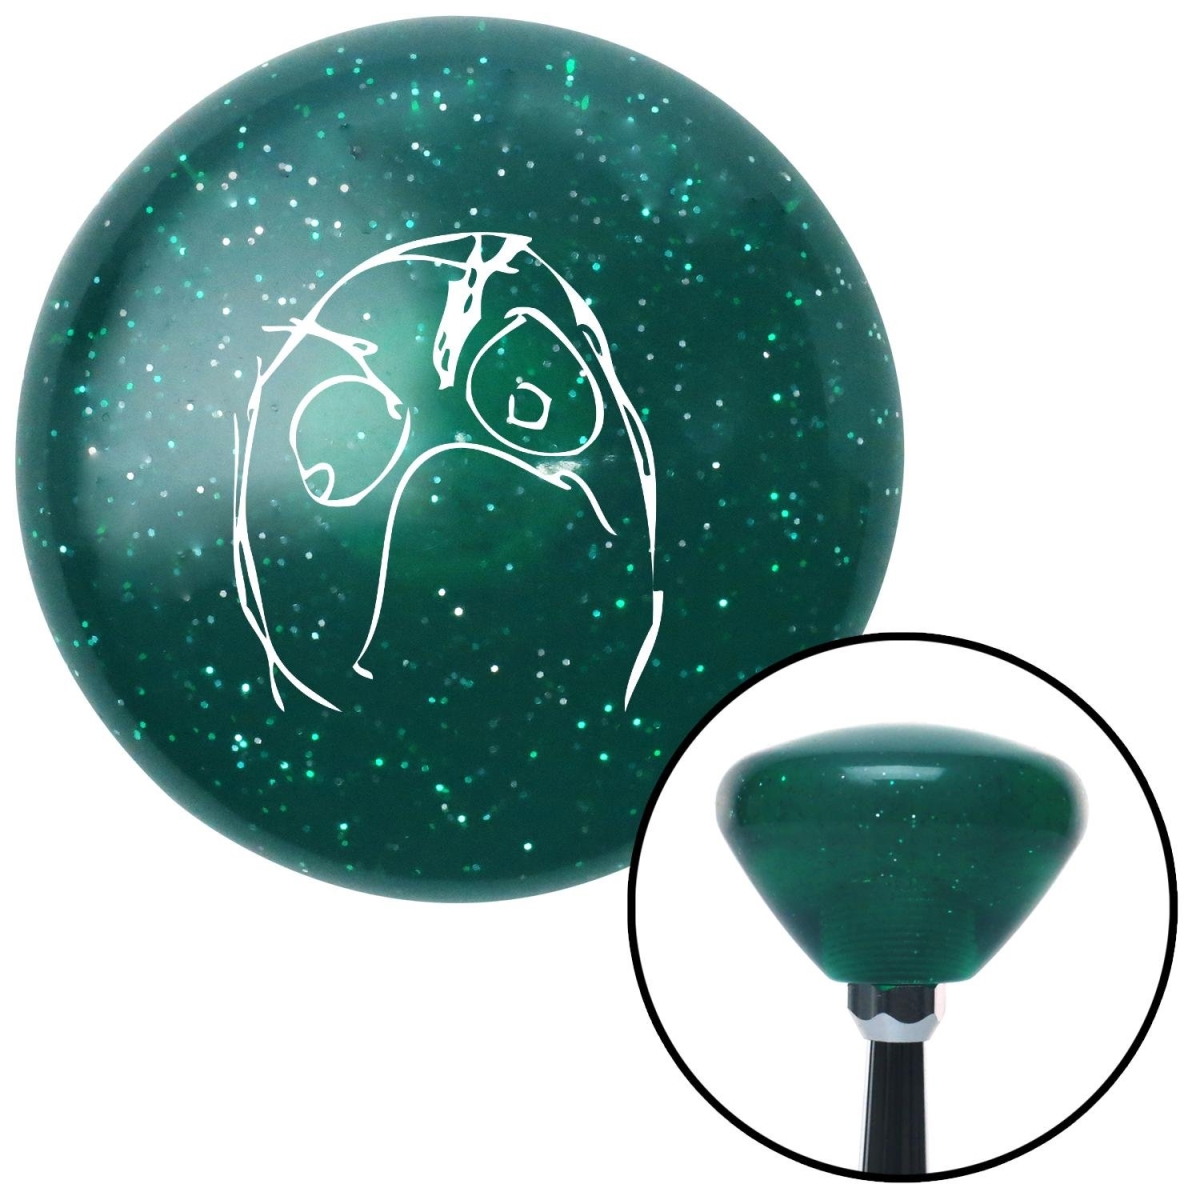 American Shifter 203263 White Angry Meme Green Retro Metal Flake Shift Knob with M16 x 1.5 Insert Shifter Brody -  American Shifter Company